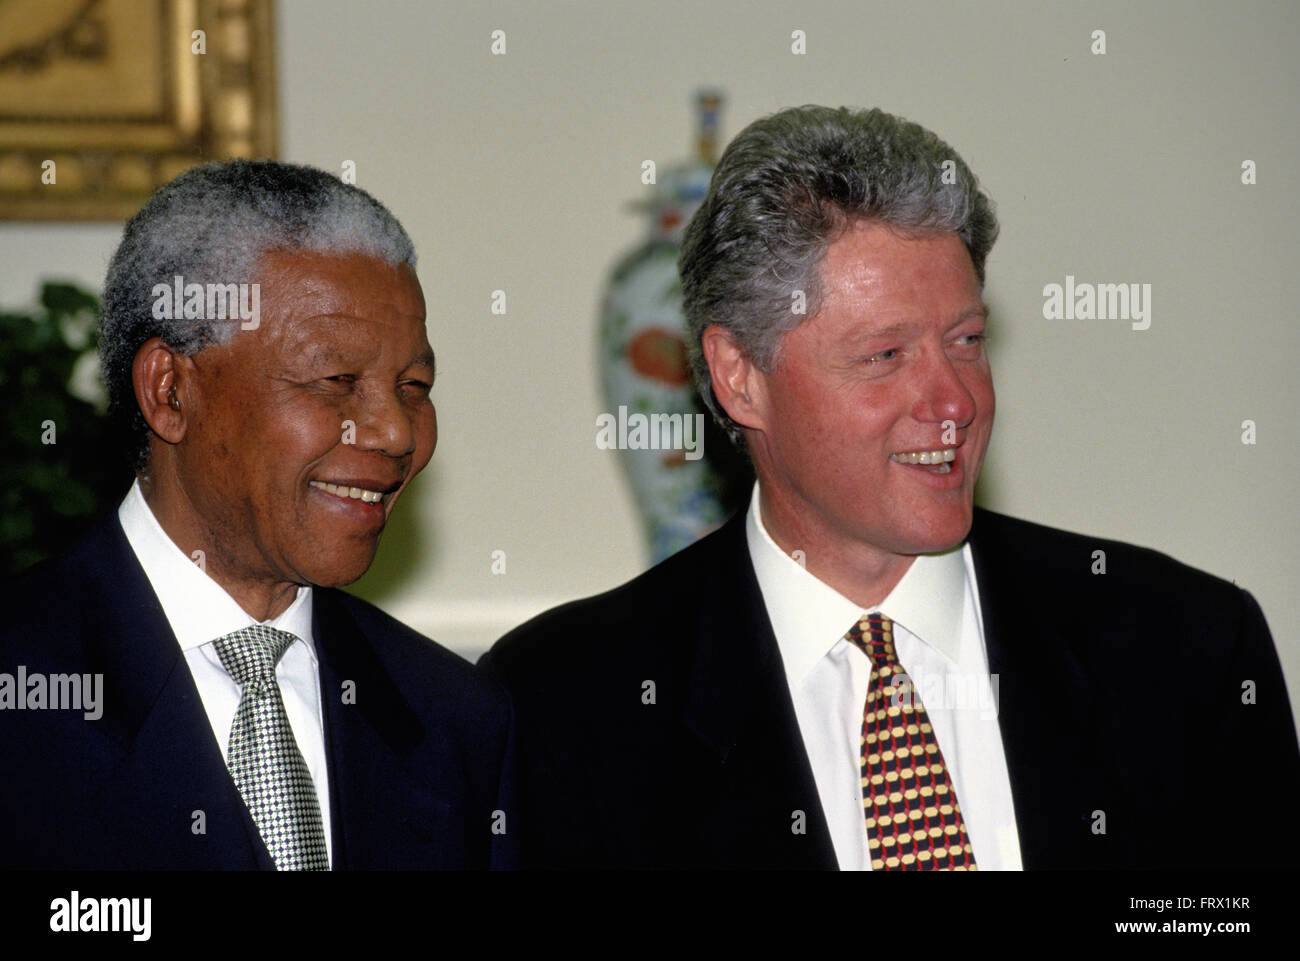 Washington, DC., USA, 5th October,1994 President William Jefferson Clinton hosts South African President Nelson Mandella at the White House. Mandella was a South African anti-apartheid revolutionary, politician and philanthropist who served as President of South Africa from 1994 to 1999. He was South Africa's first black chief executive, and the first elected in a fully representative democratic election. His government focused on dismantling the legacy of apartheid through tackling institutionalized racism, poverty and inequality, and fostering racial reconciliation.  Credit: Mark Reinstein Stock Photo